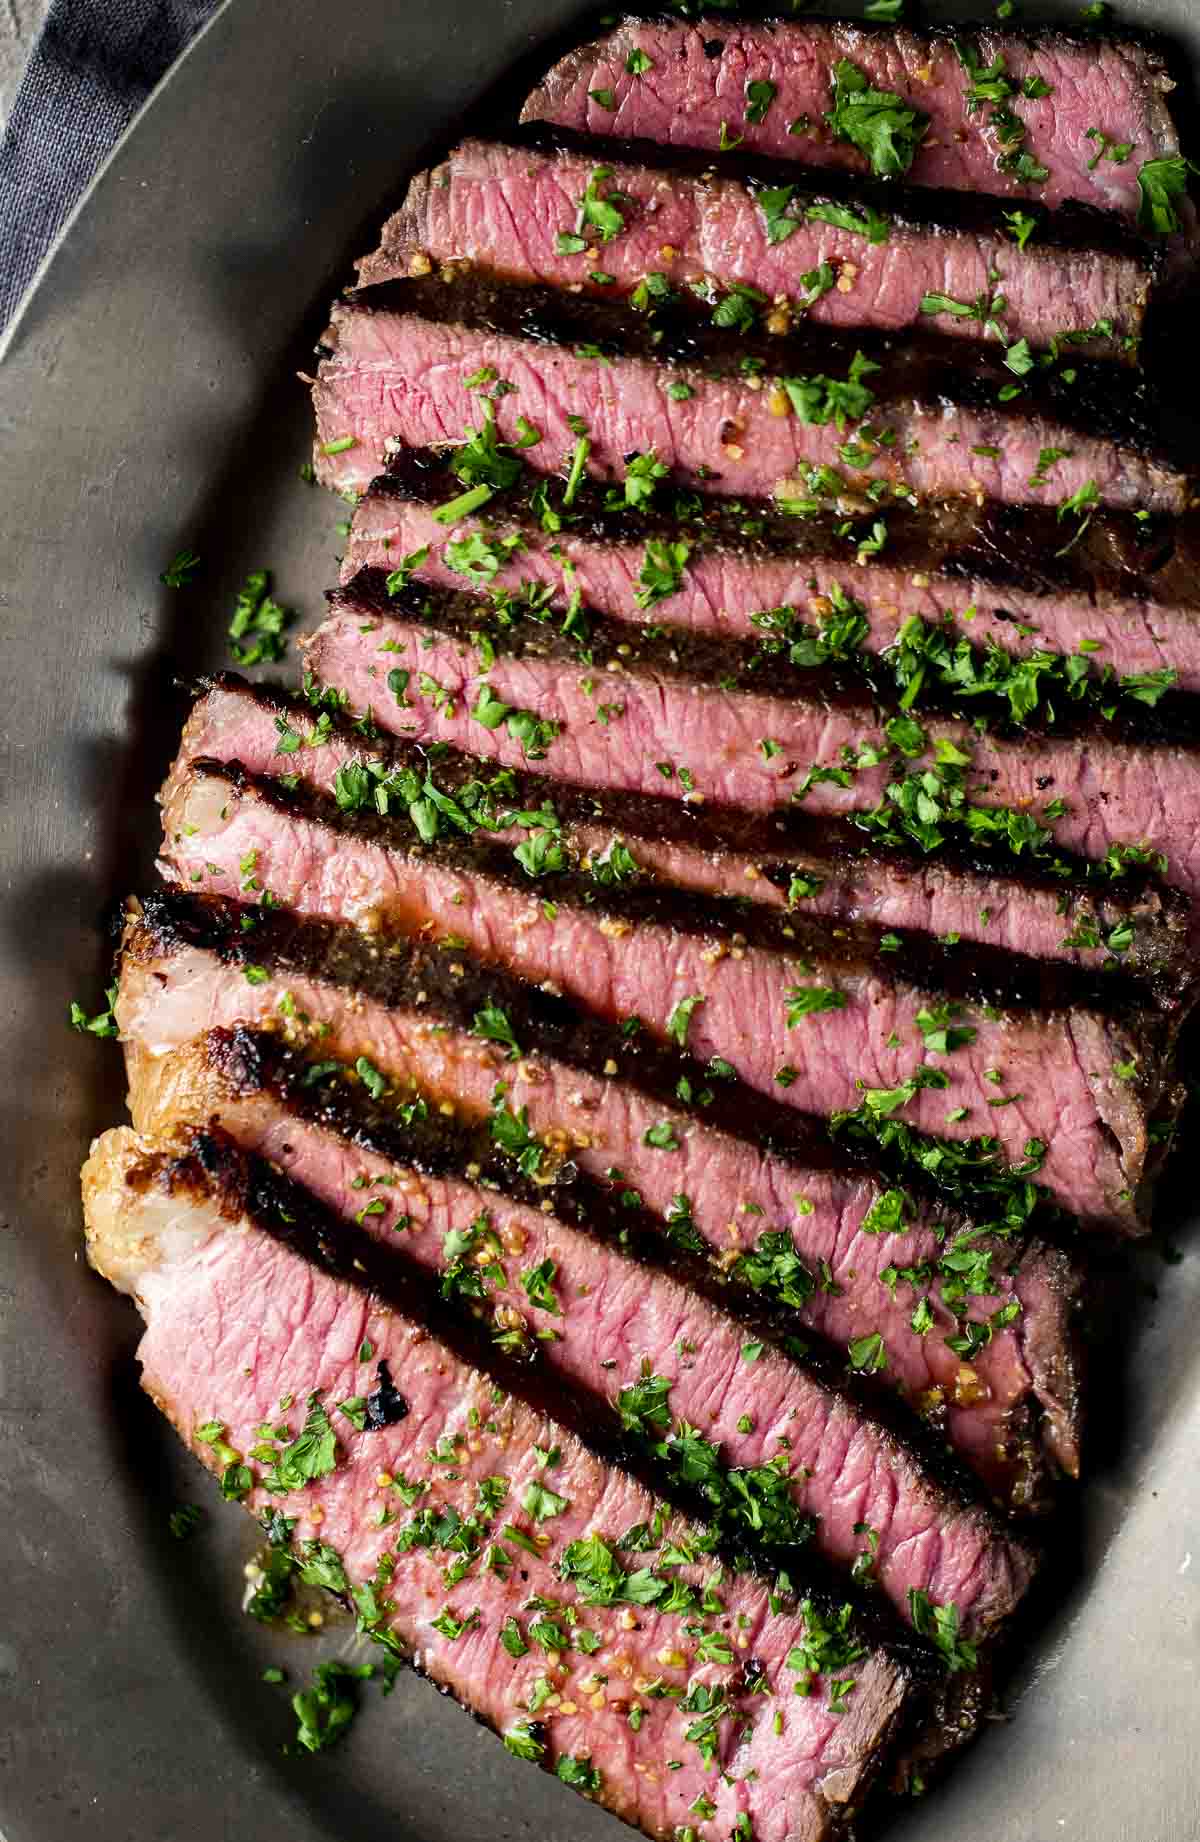 Overhead of London broil sliced in a pan.